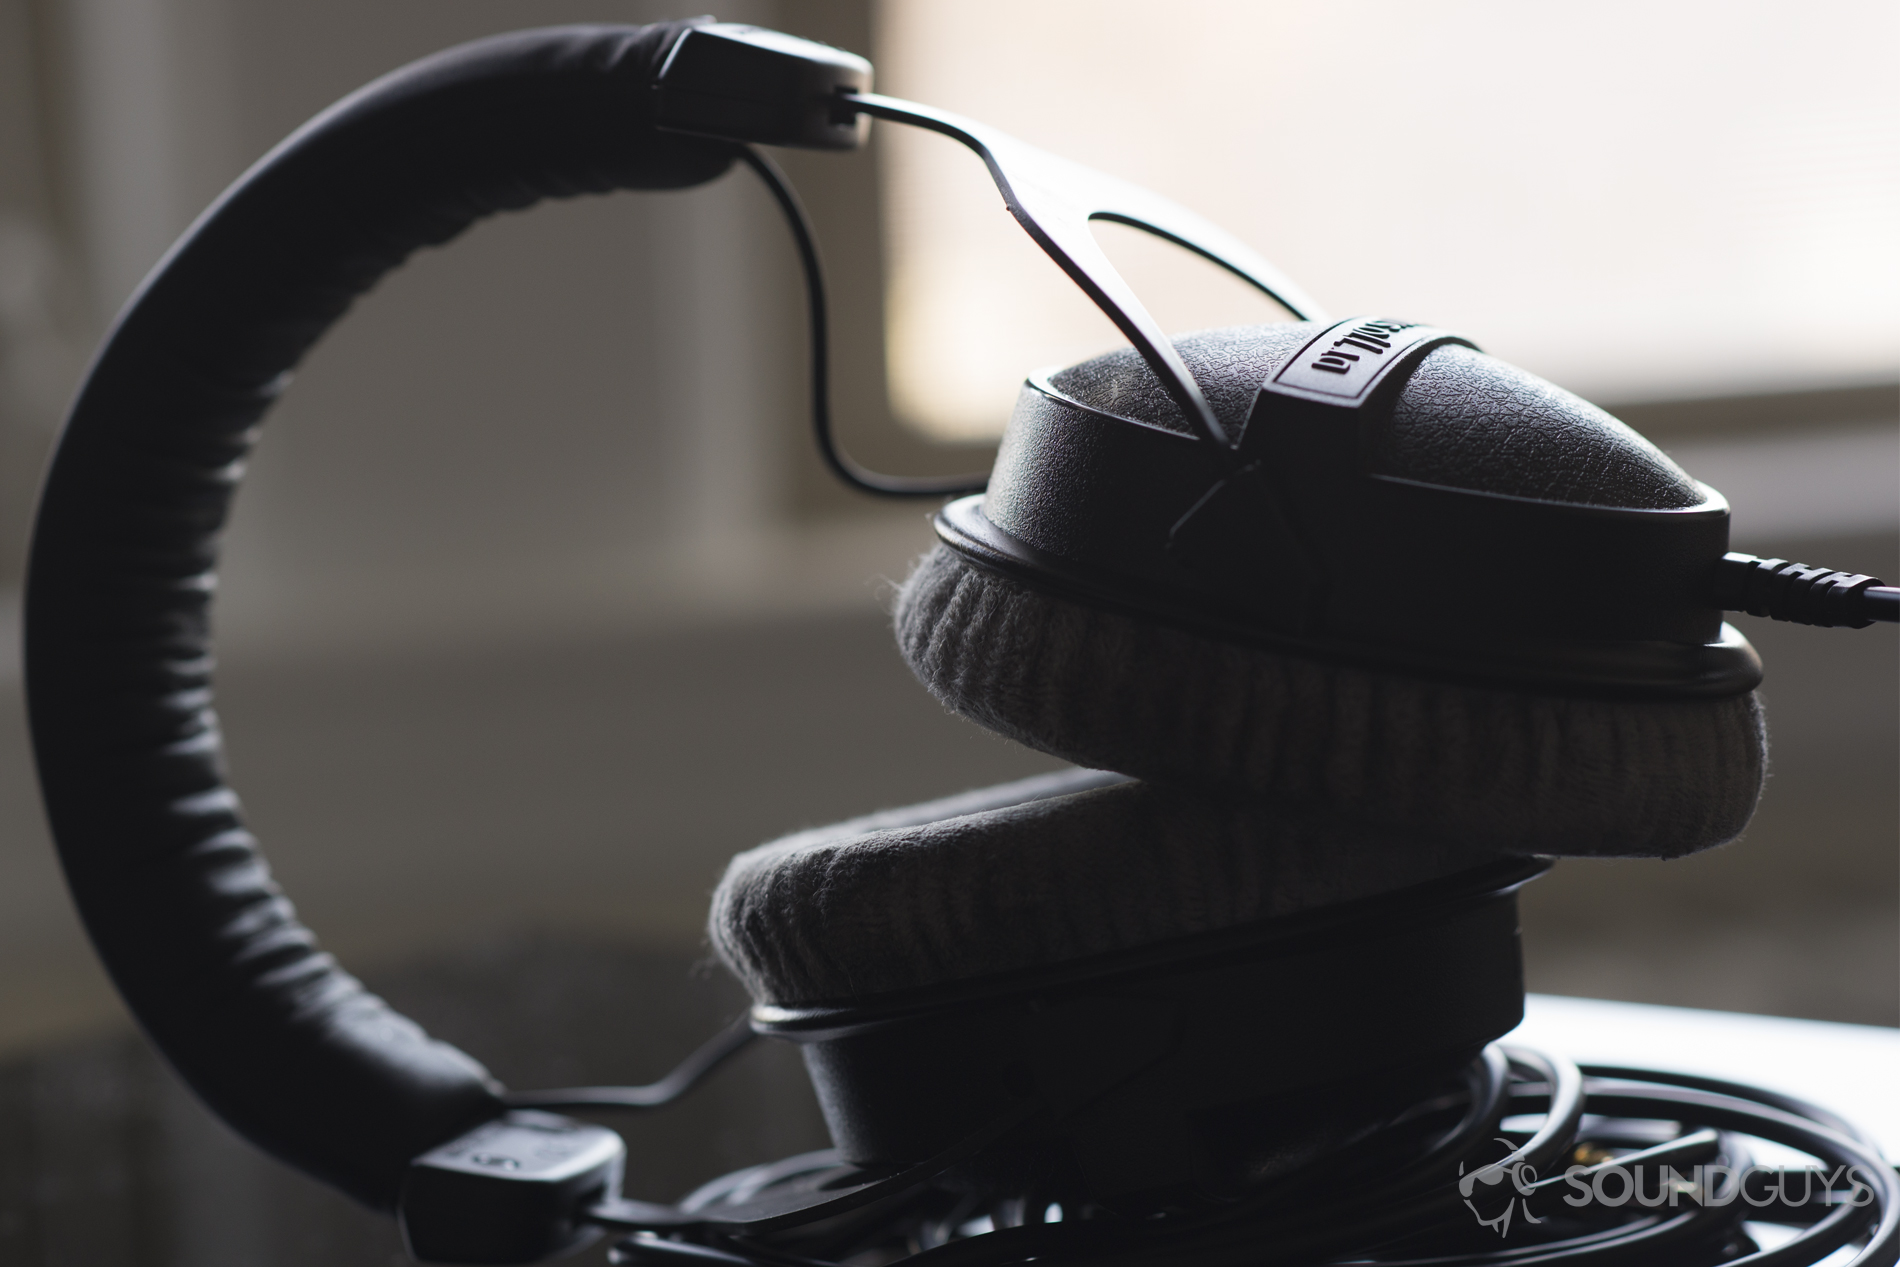 Beyerdynamic DT 770 Studio review: Audiophile sound without the